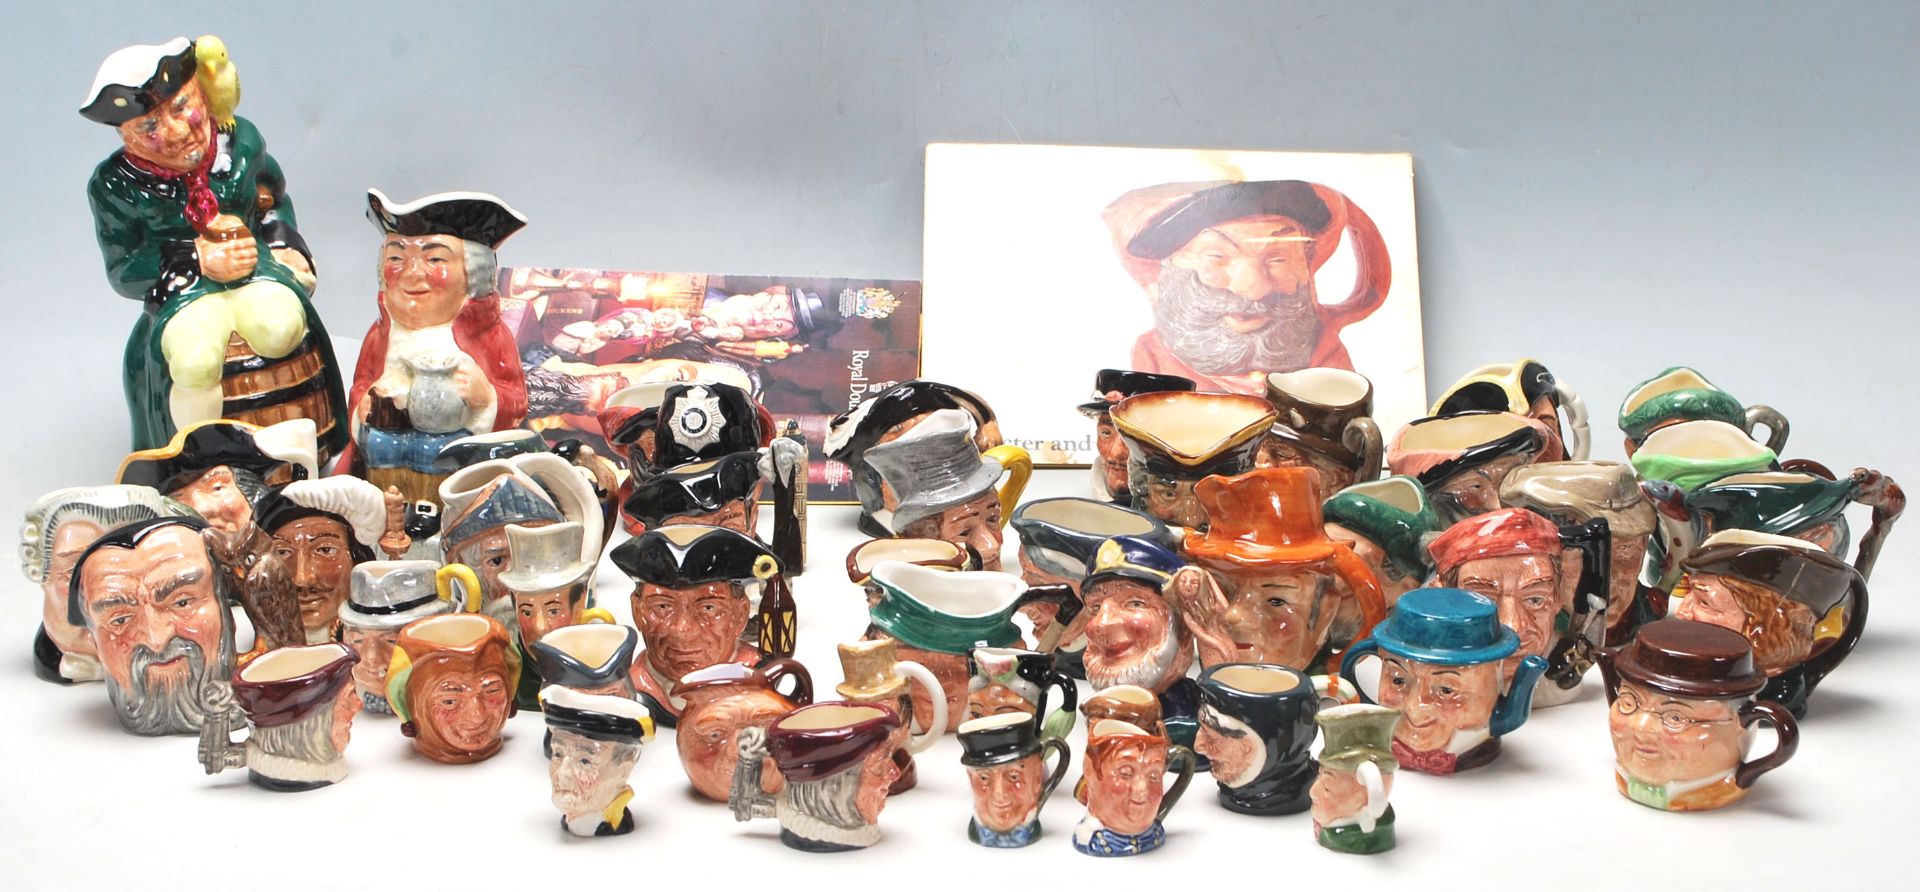 A LARGE COLLECTION OF ROYAL DOULTON MINATURE TOBY